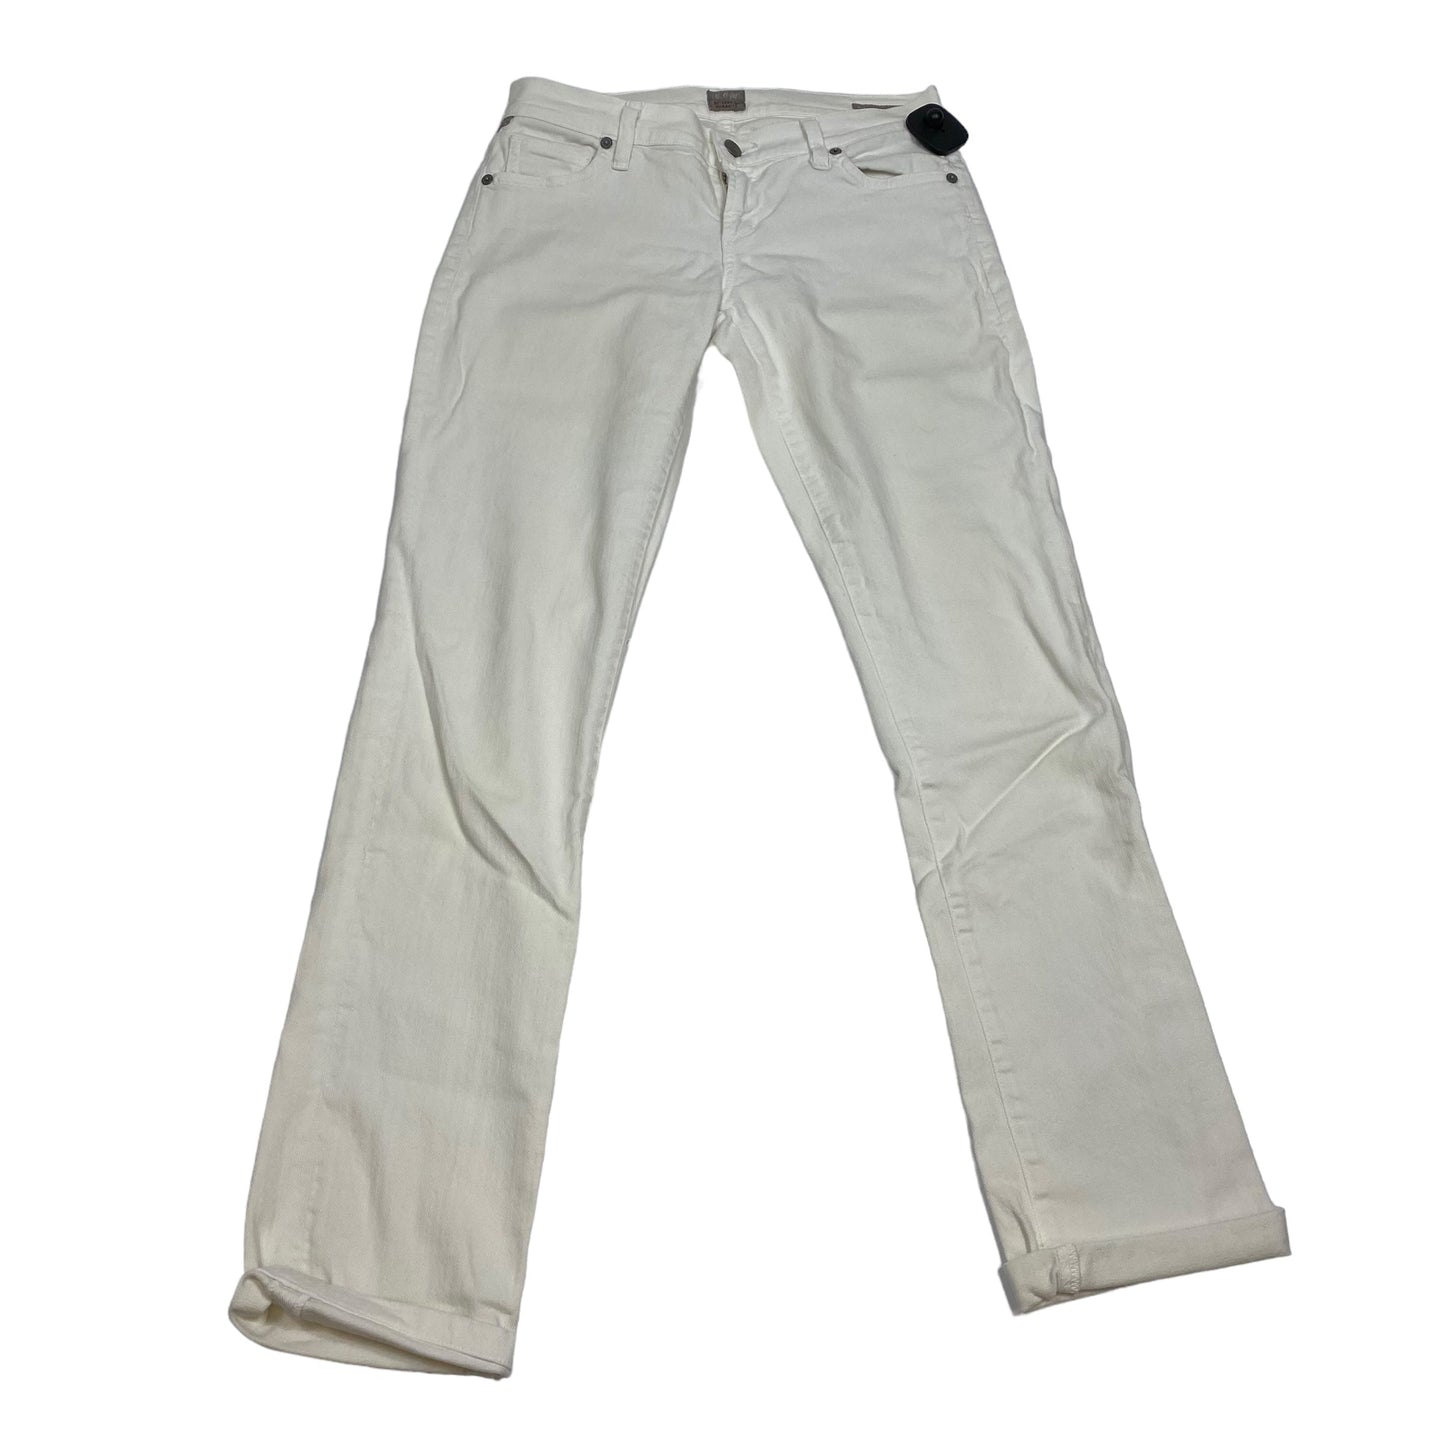 White Pants Designer Citizens Of Humanity, Size 2